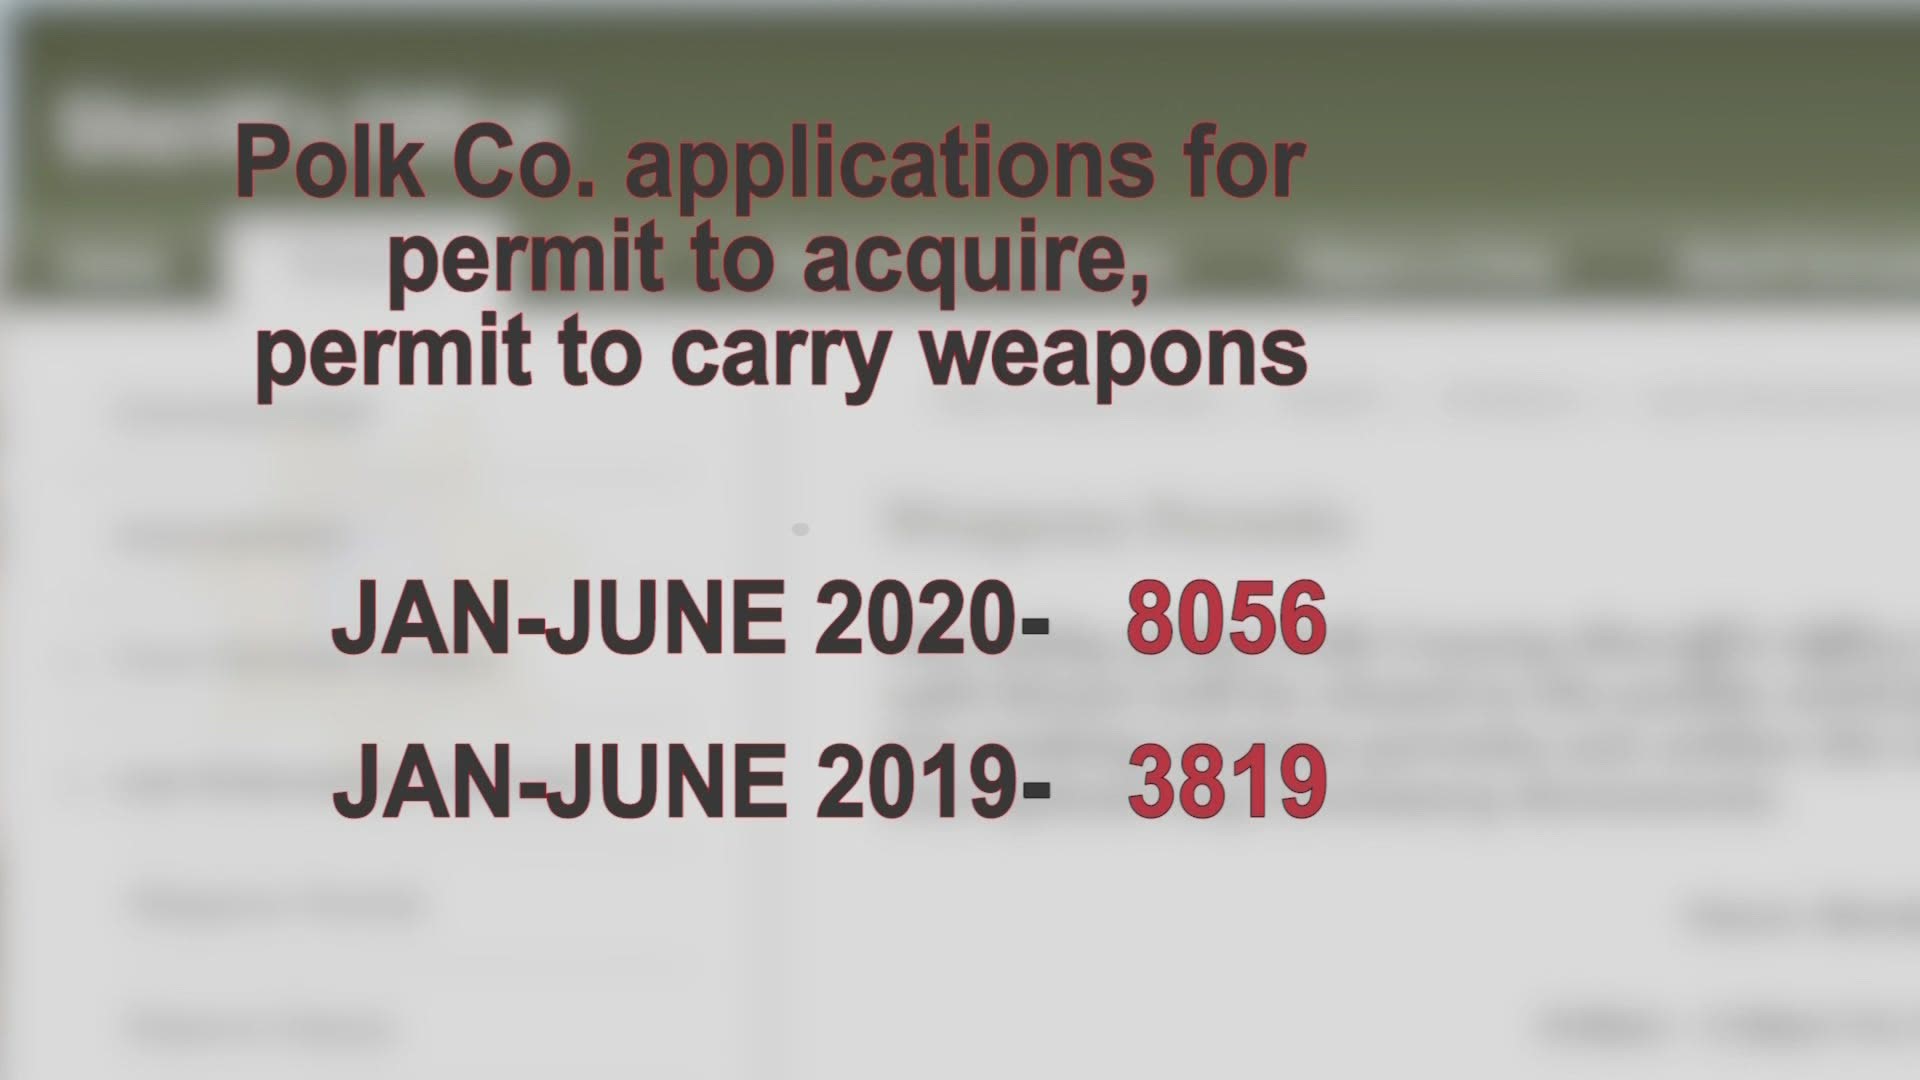 The Polk County Sheriff’s Office got more than 8,000 applications for permits to carry from January until June of this year--more than double of this time last year.